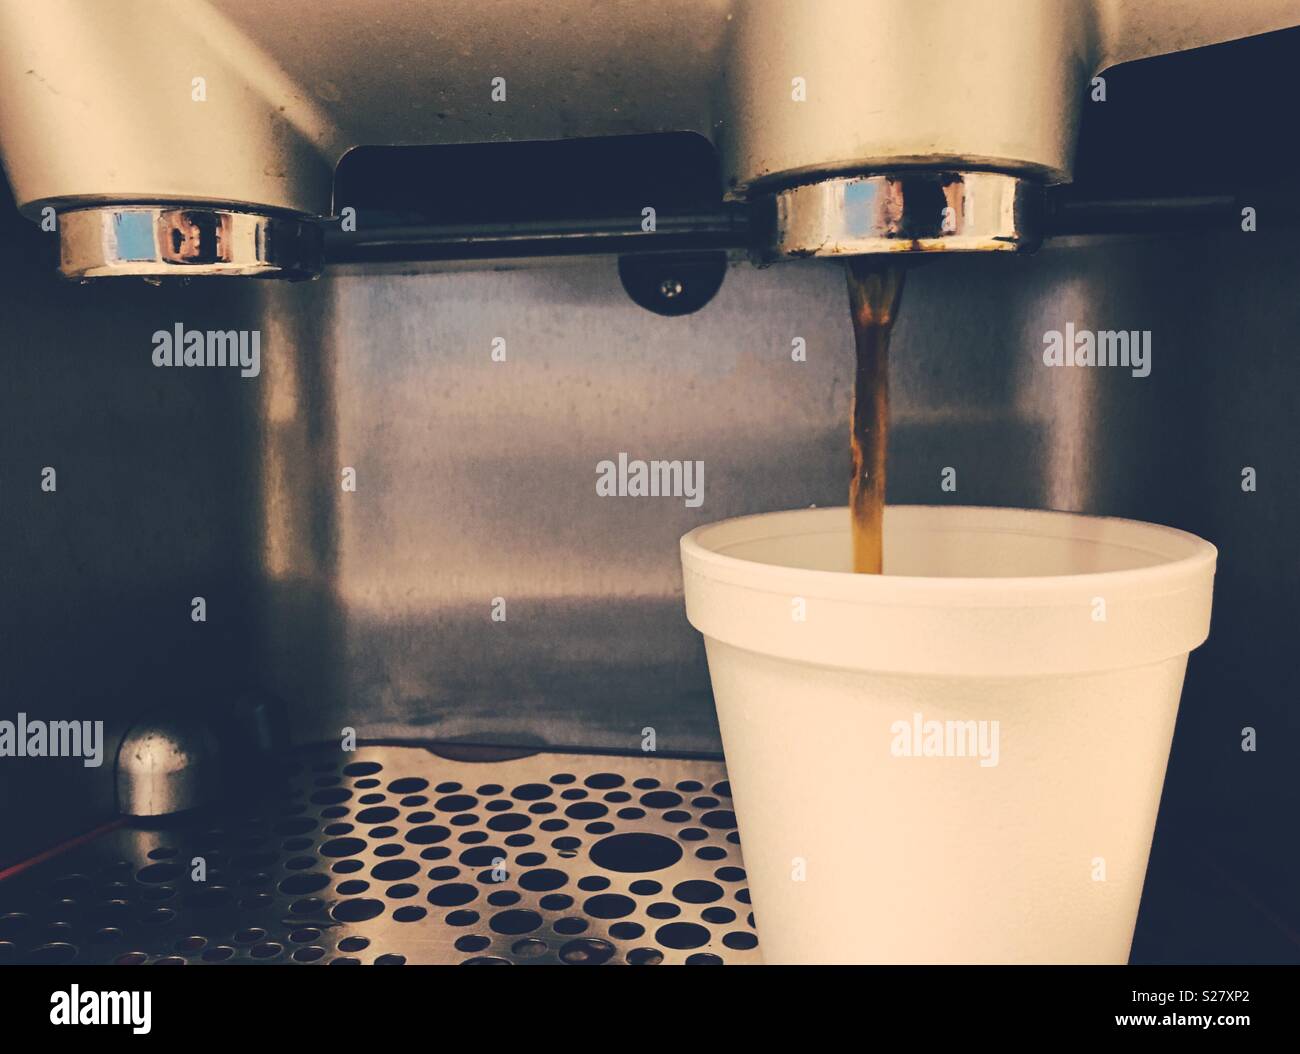 Espresso machine pouring a cup of coffee. Stock Photo